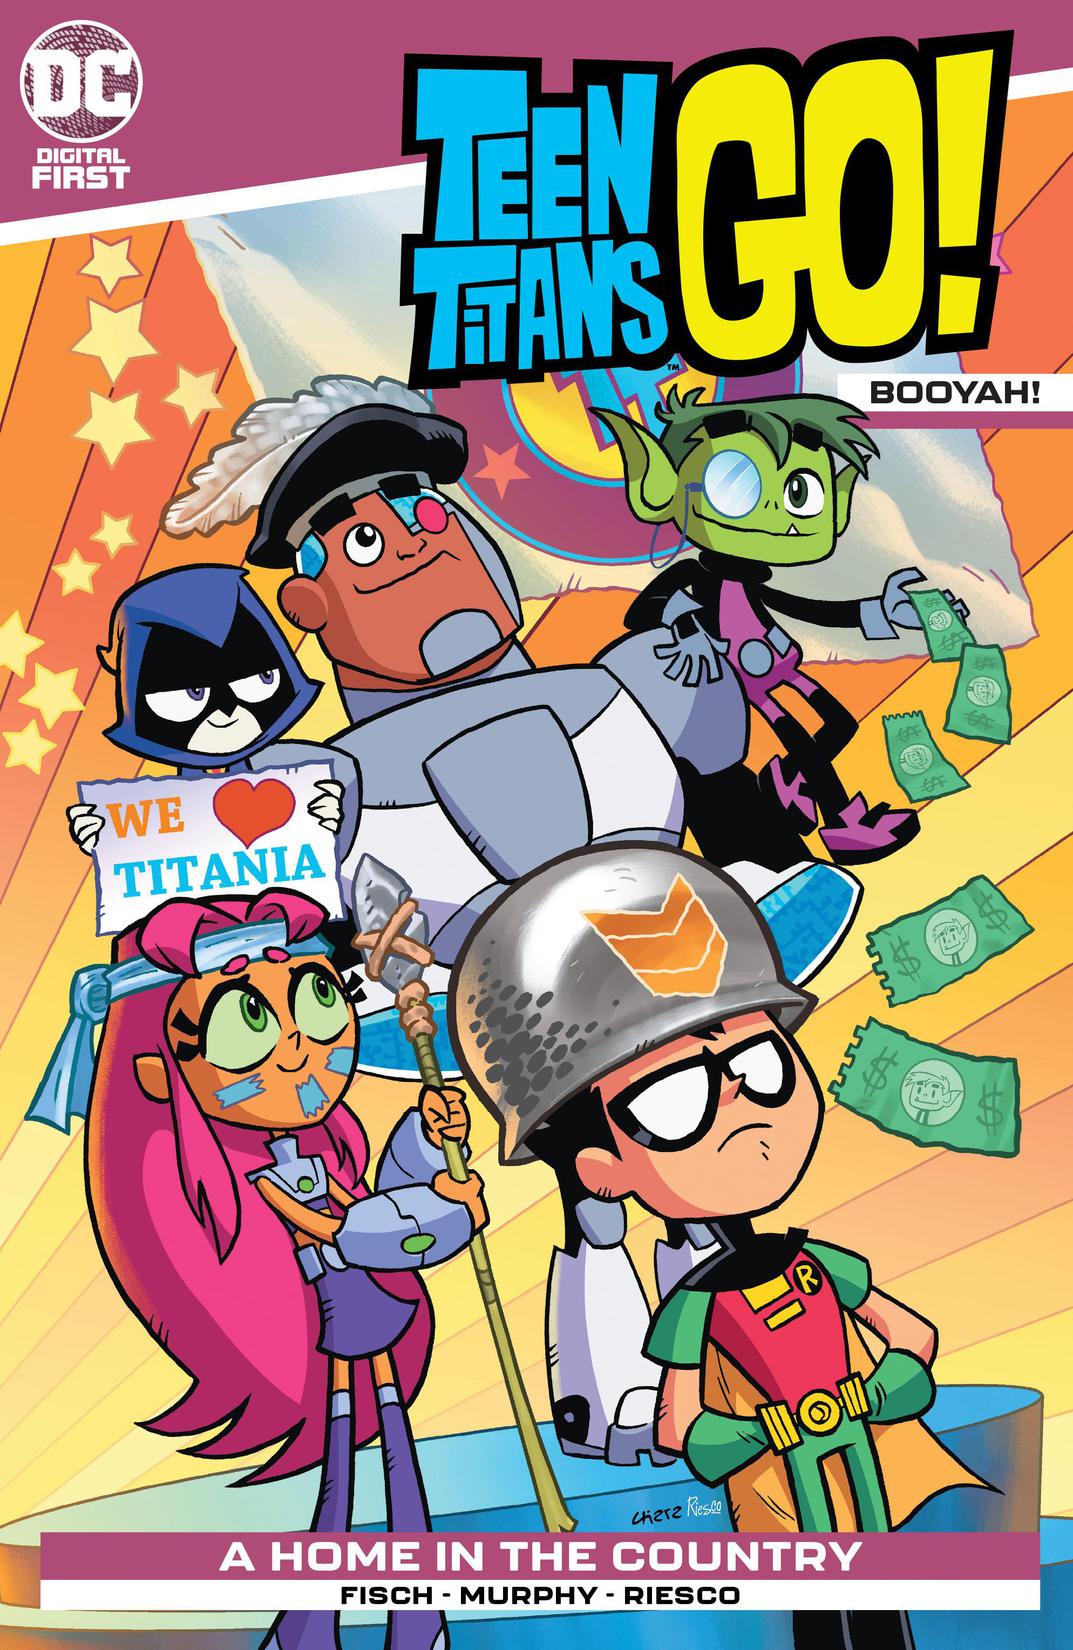 Teen Titans Go!: Booyah! #2 preview images